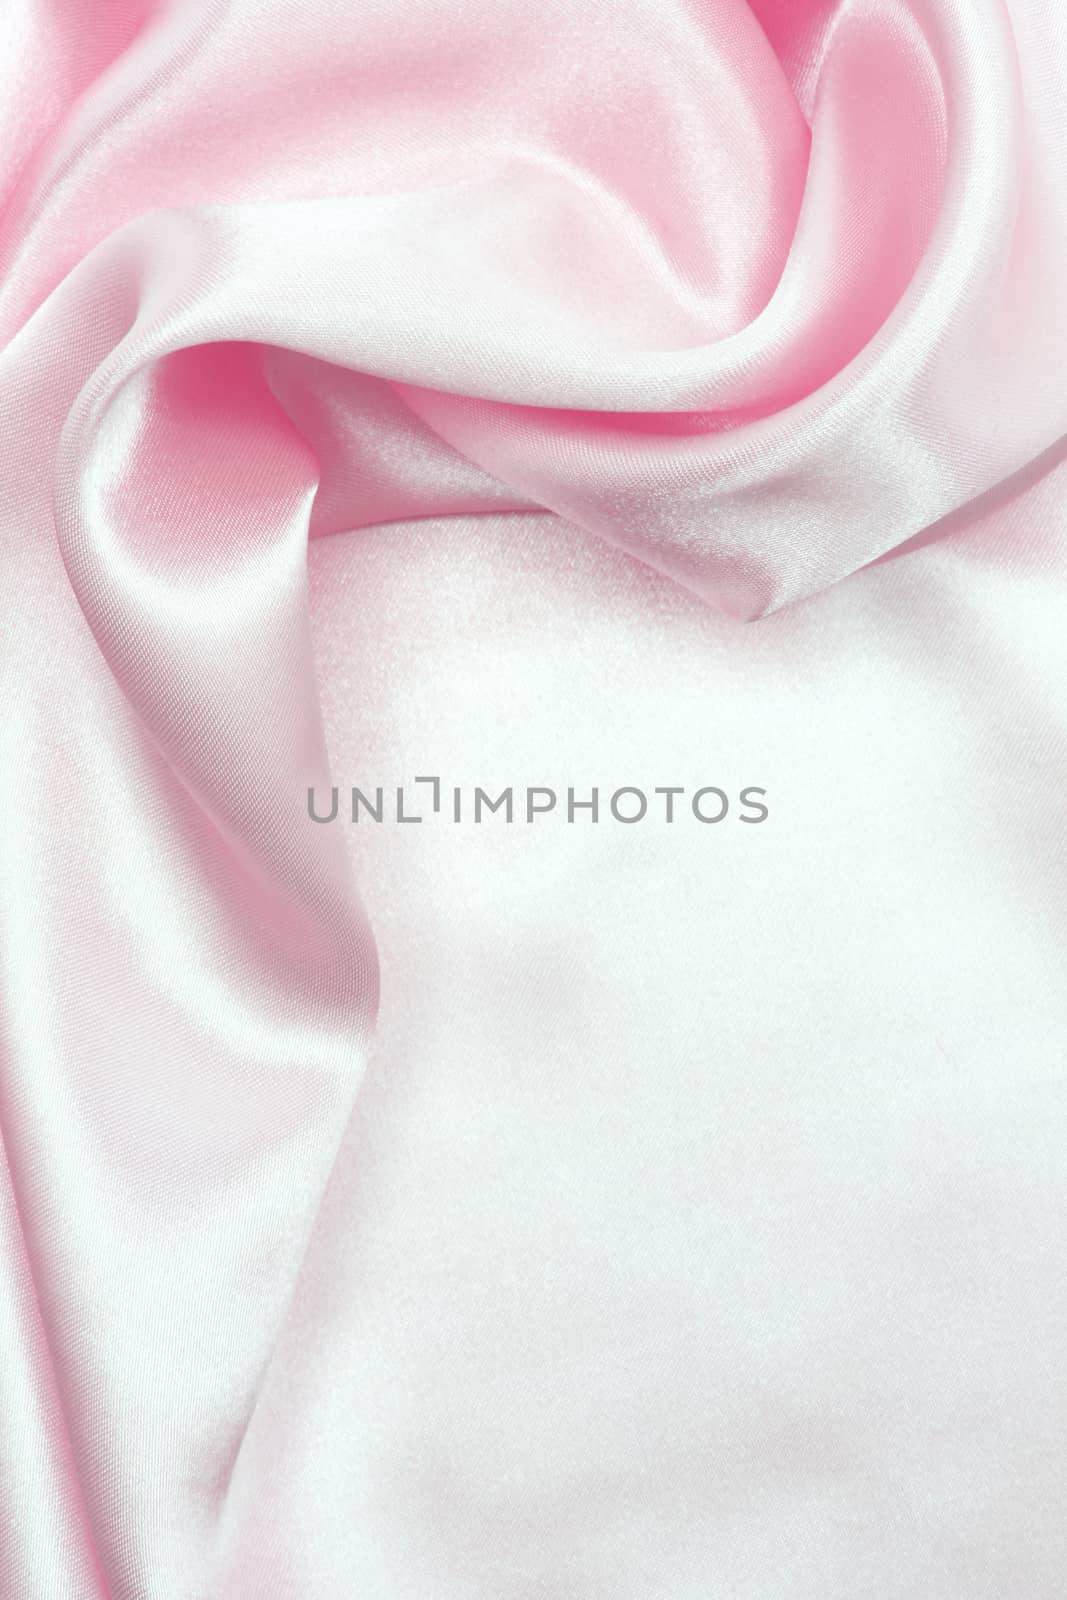 Smooth pink silk as background  by oxanatravel